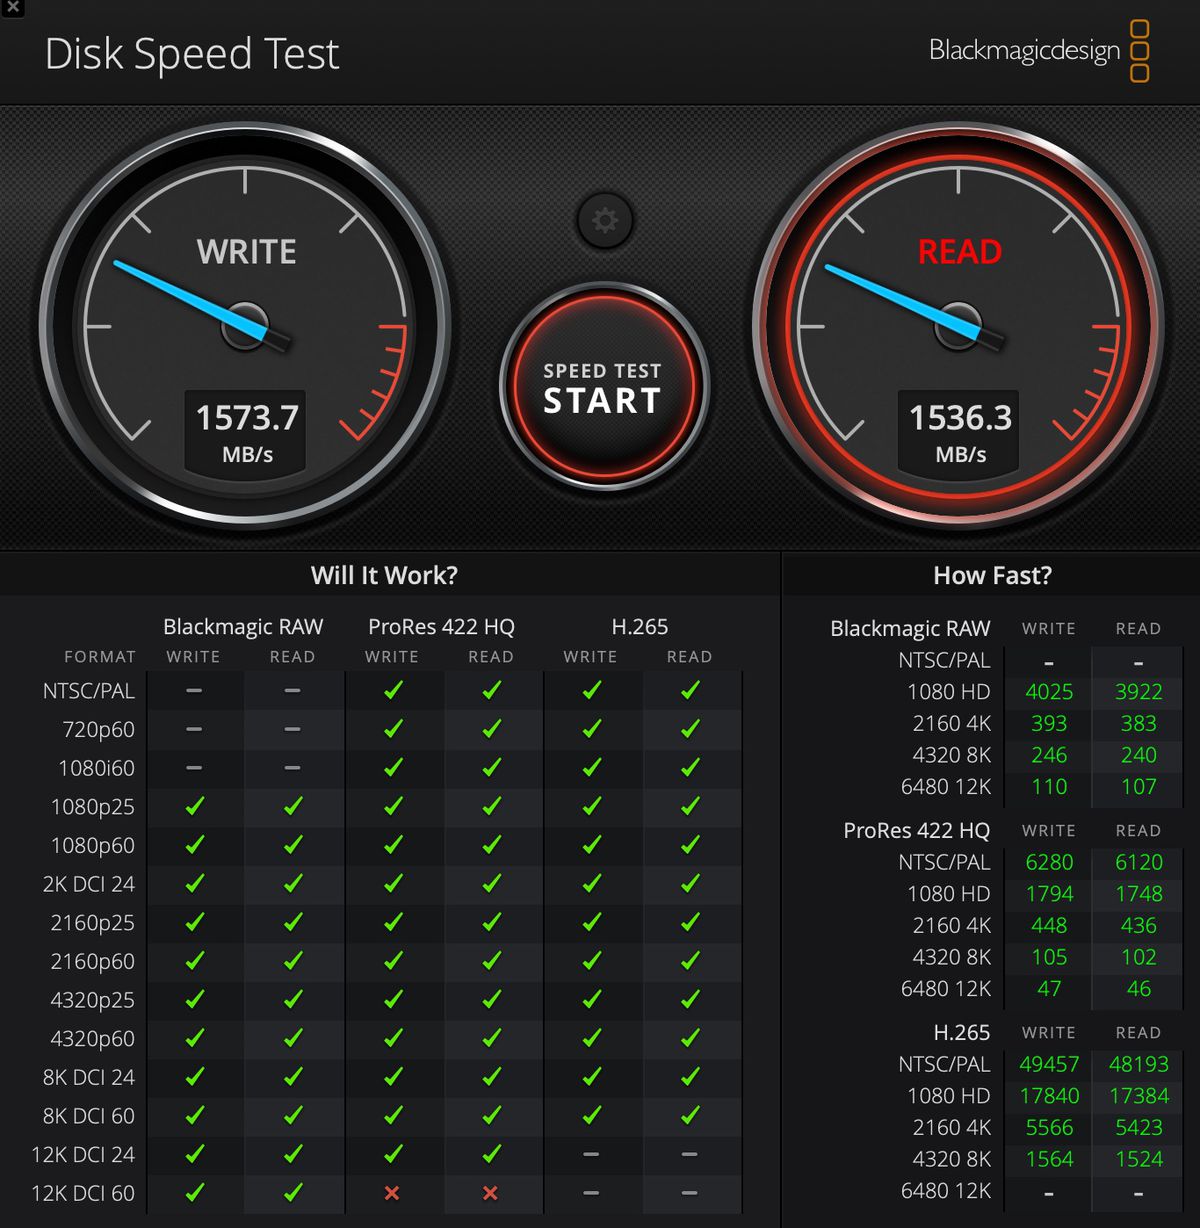 A screenshot of Blackmagic Disk Speed ​​Test indicating scores of 1537.7 for Write and 1536.3 for Read.